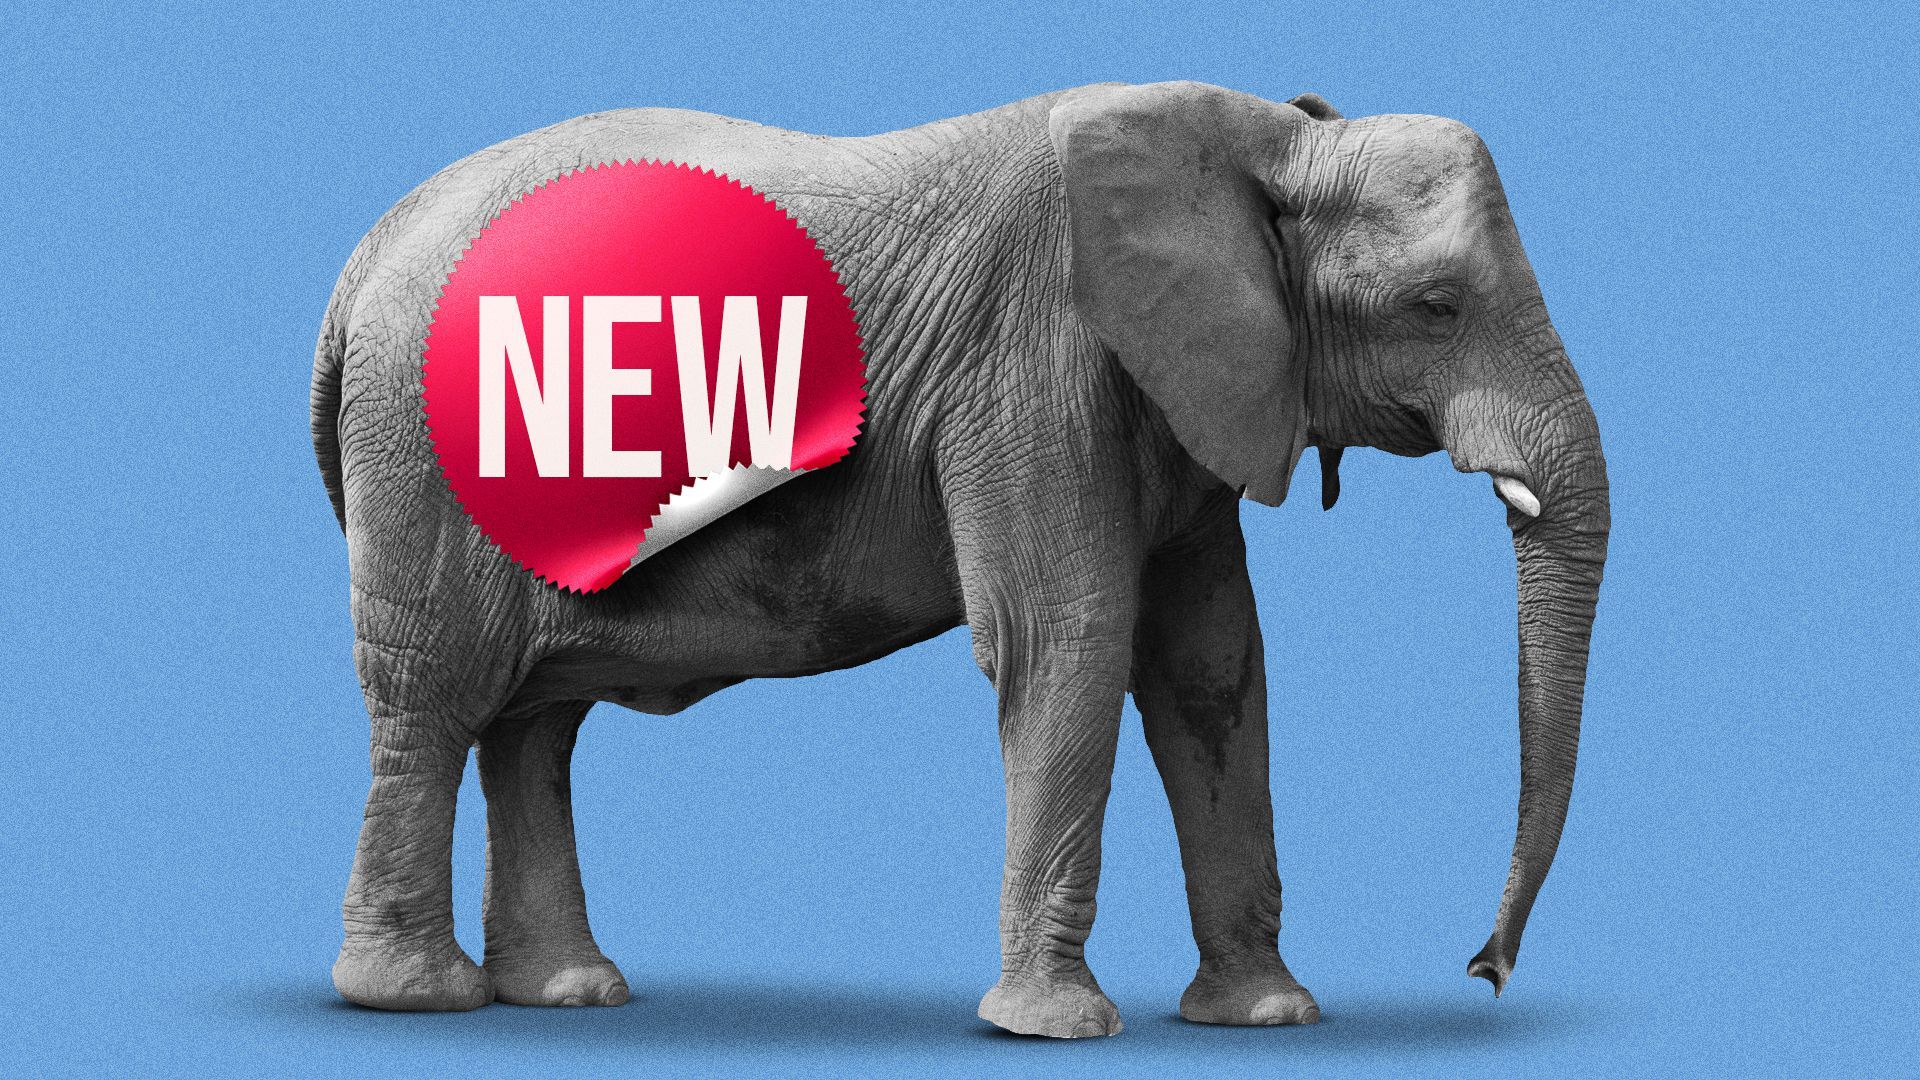 Illustration of an elephant with a red "new" sticker.